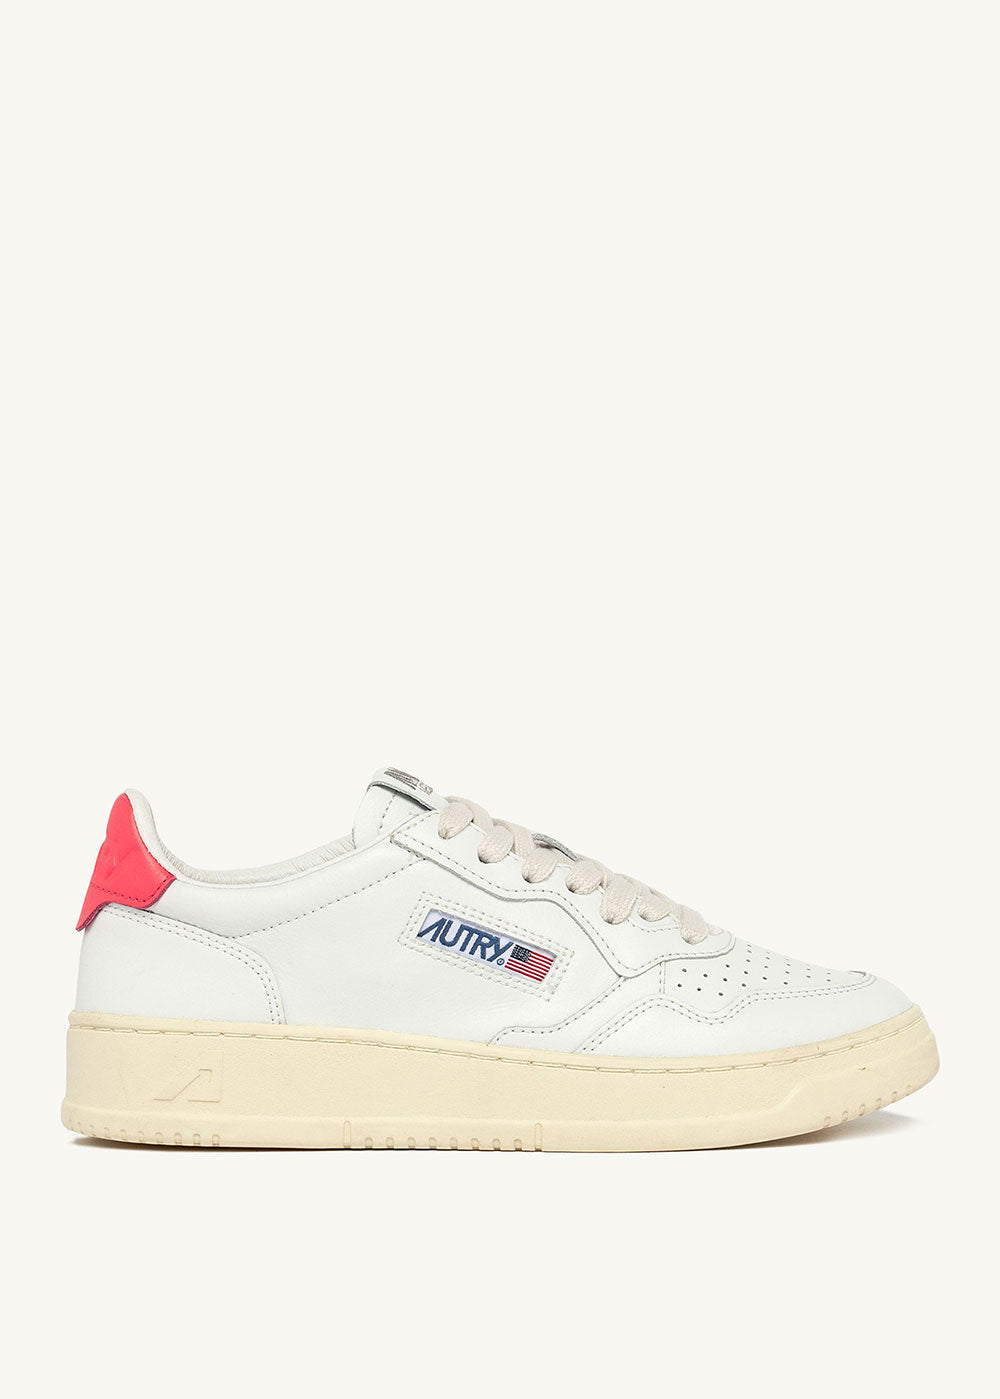 Autry Medalist Leather Sneakers - White / Coral